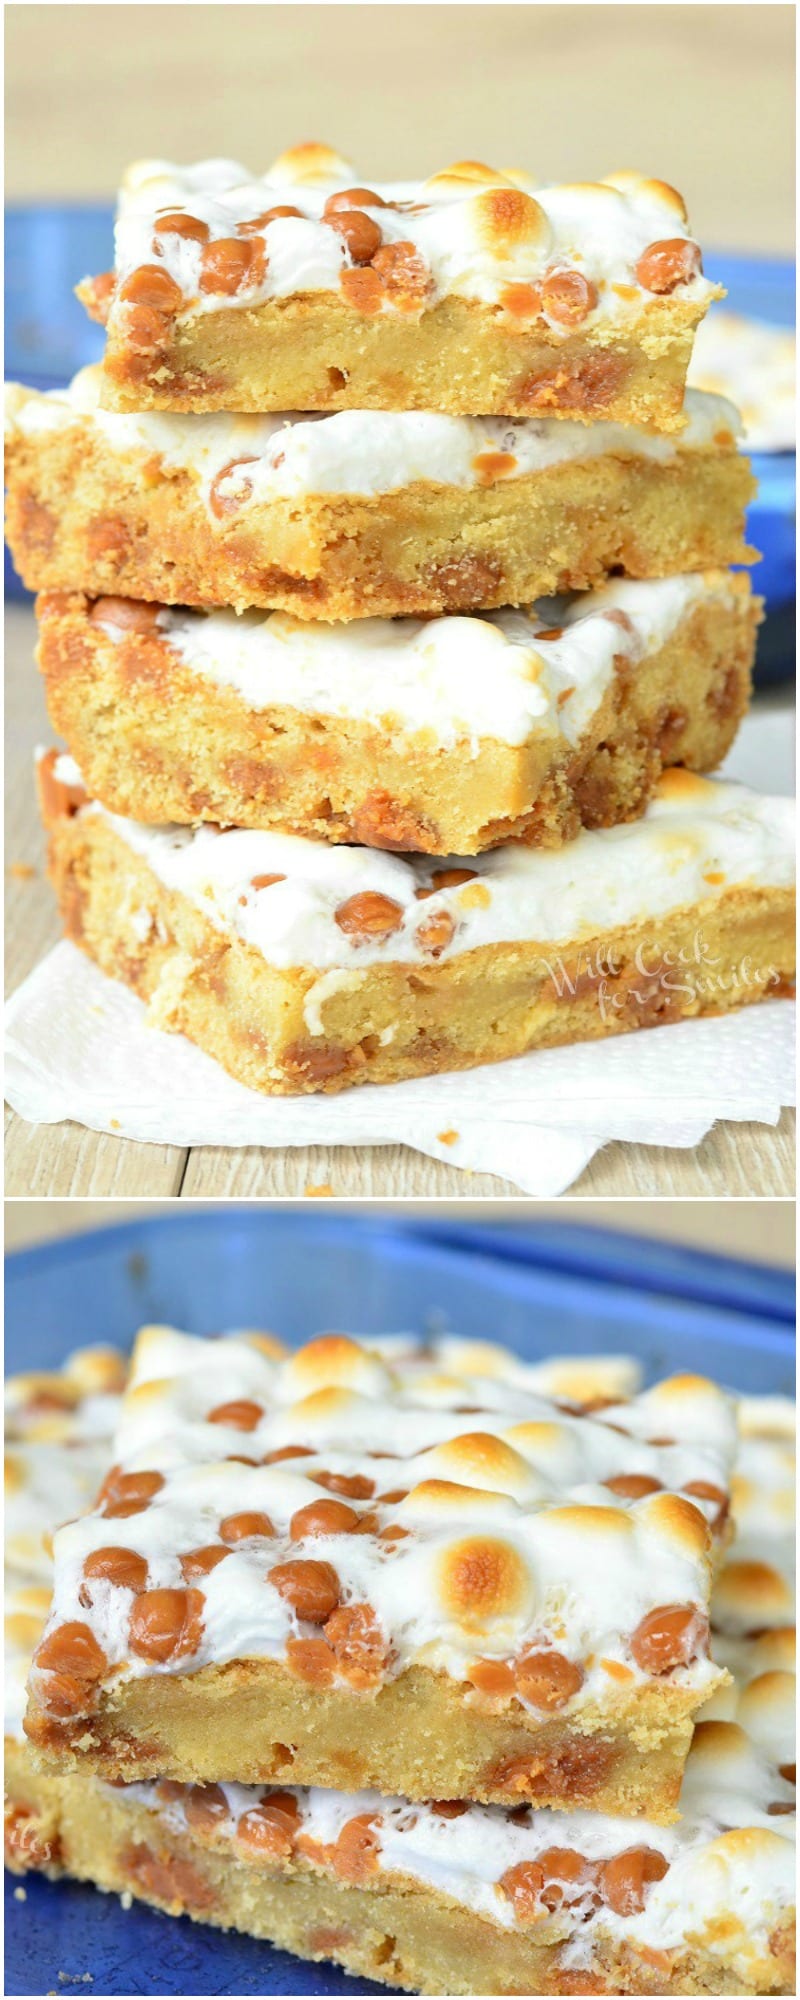 Caramel Marshmallow Cookie Bars 7 from willcookforsmiles.com #cookies #desserts